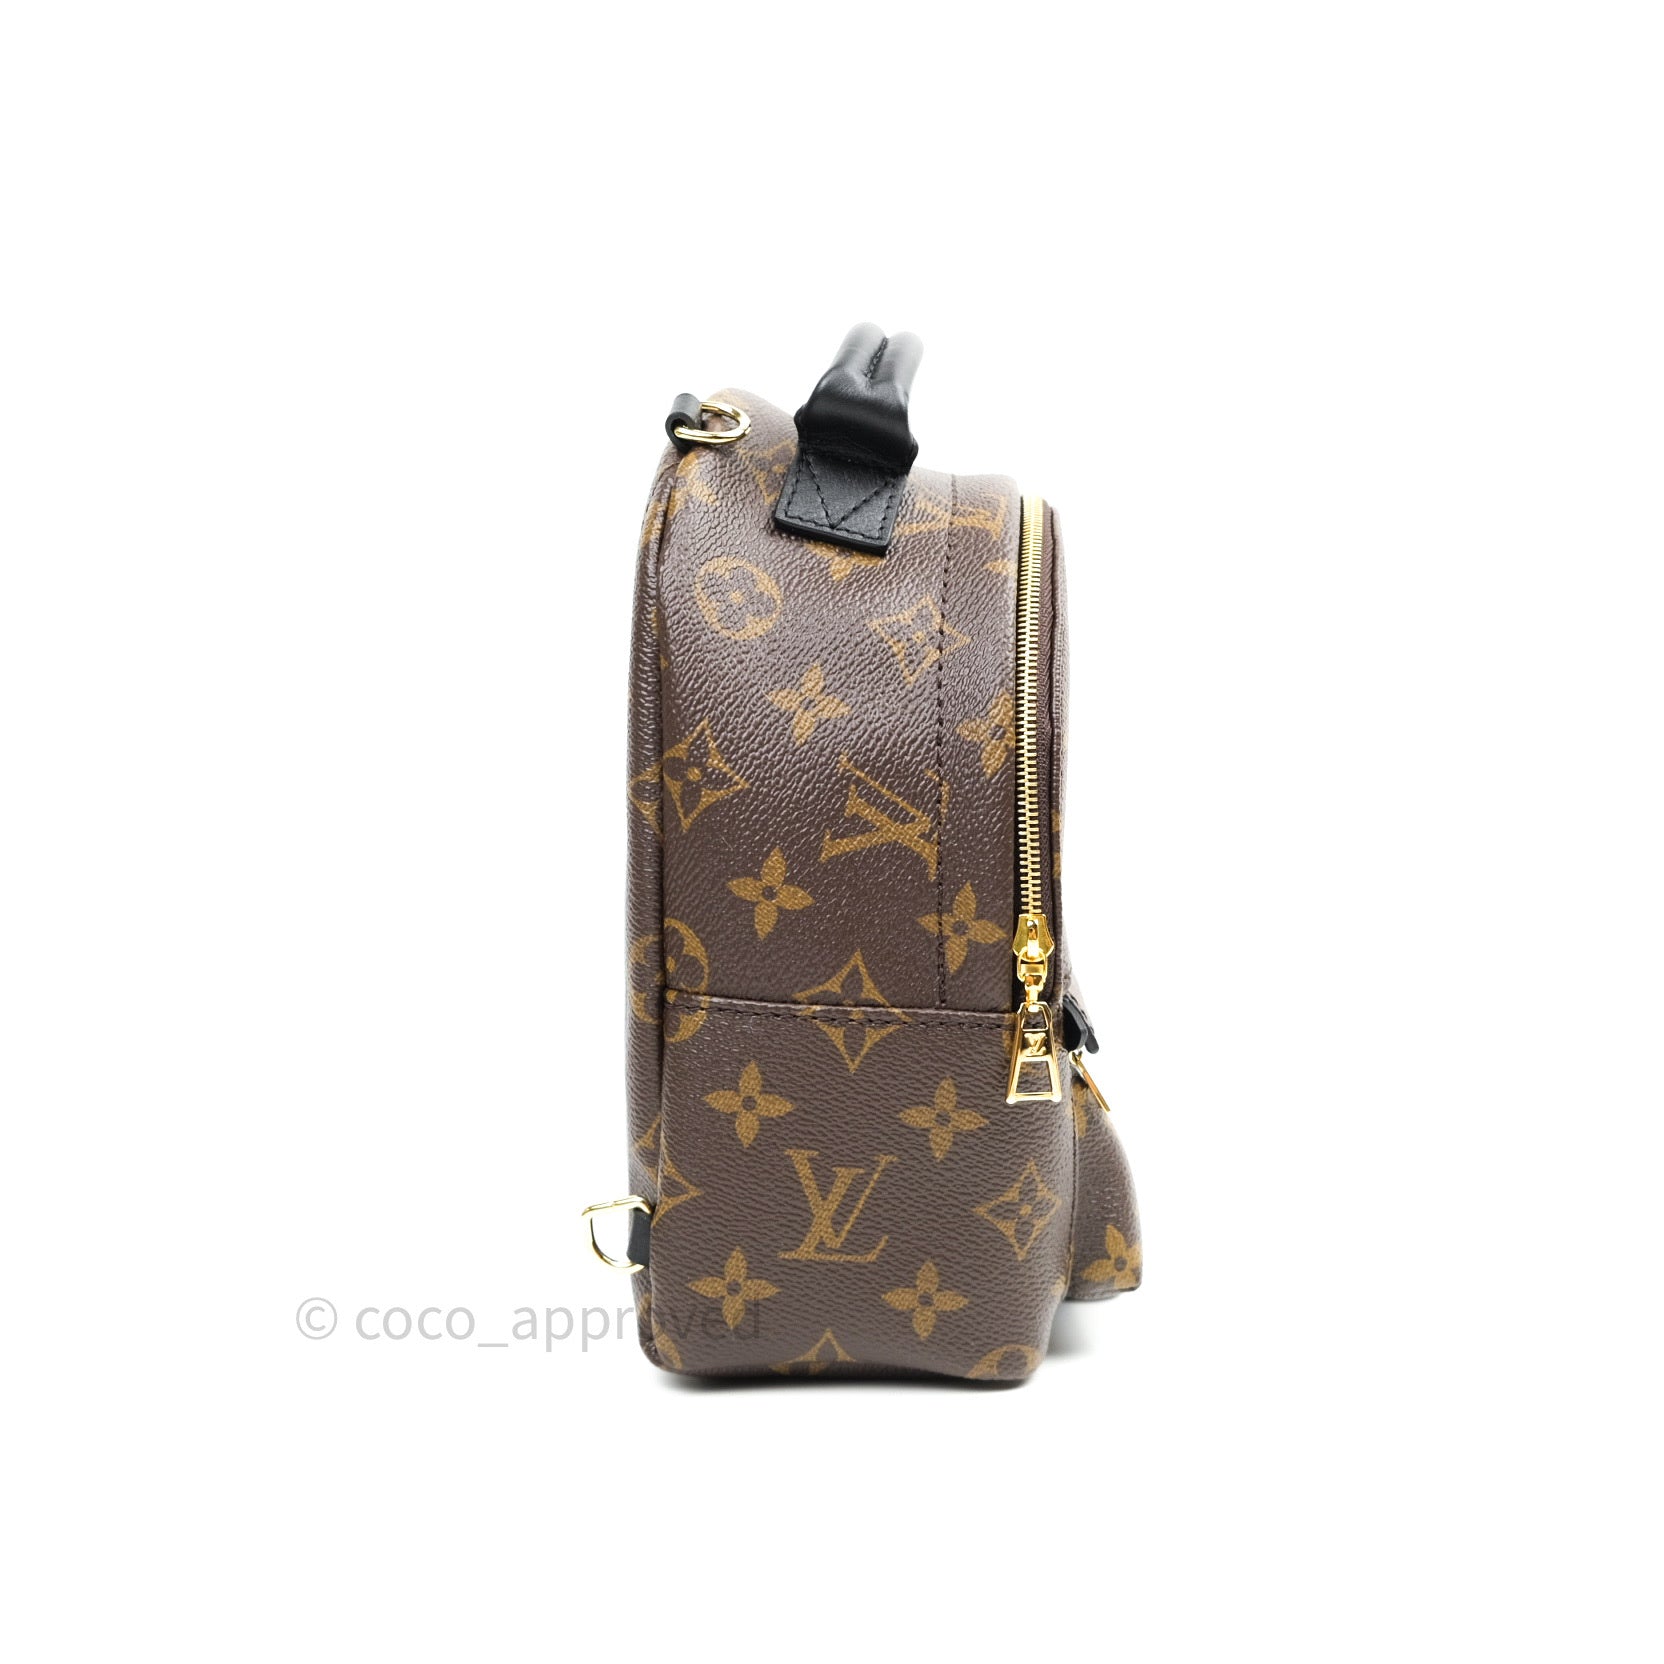 Louis Vuitton Monogram Mini Palm Springs Backpack⁣ – Coco Approved